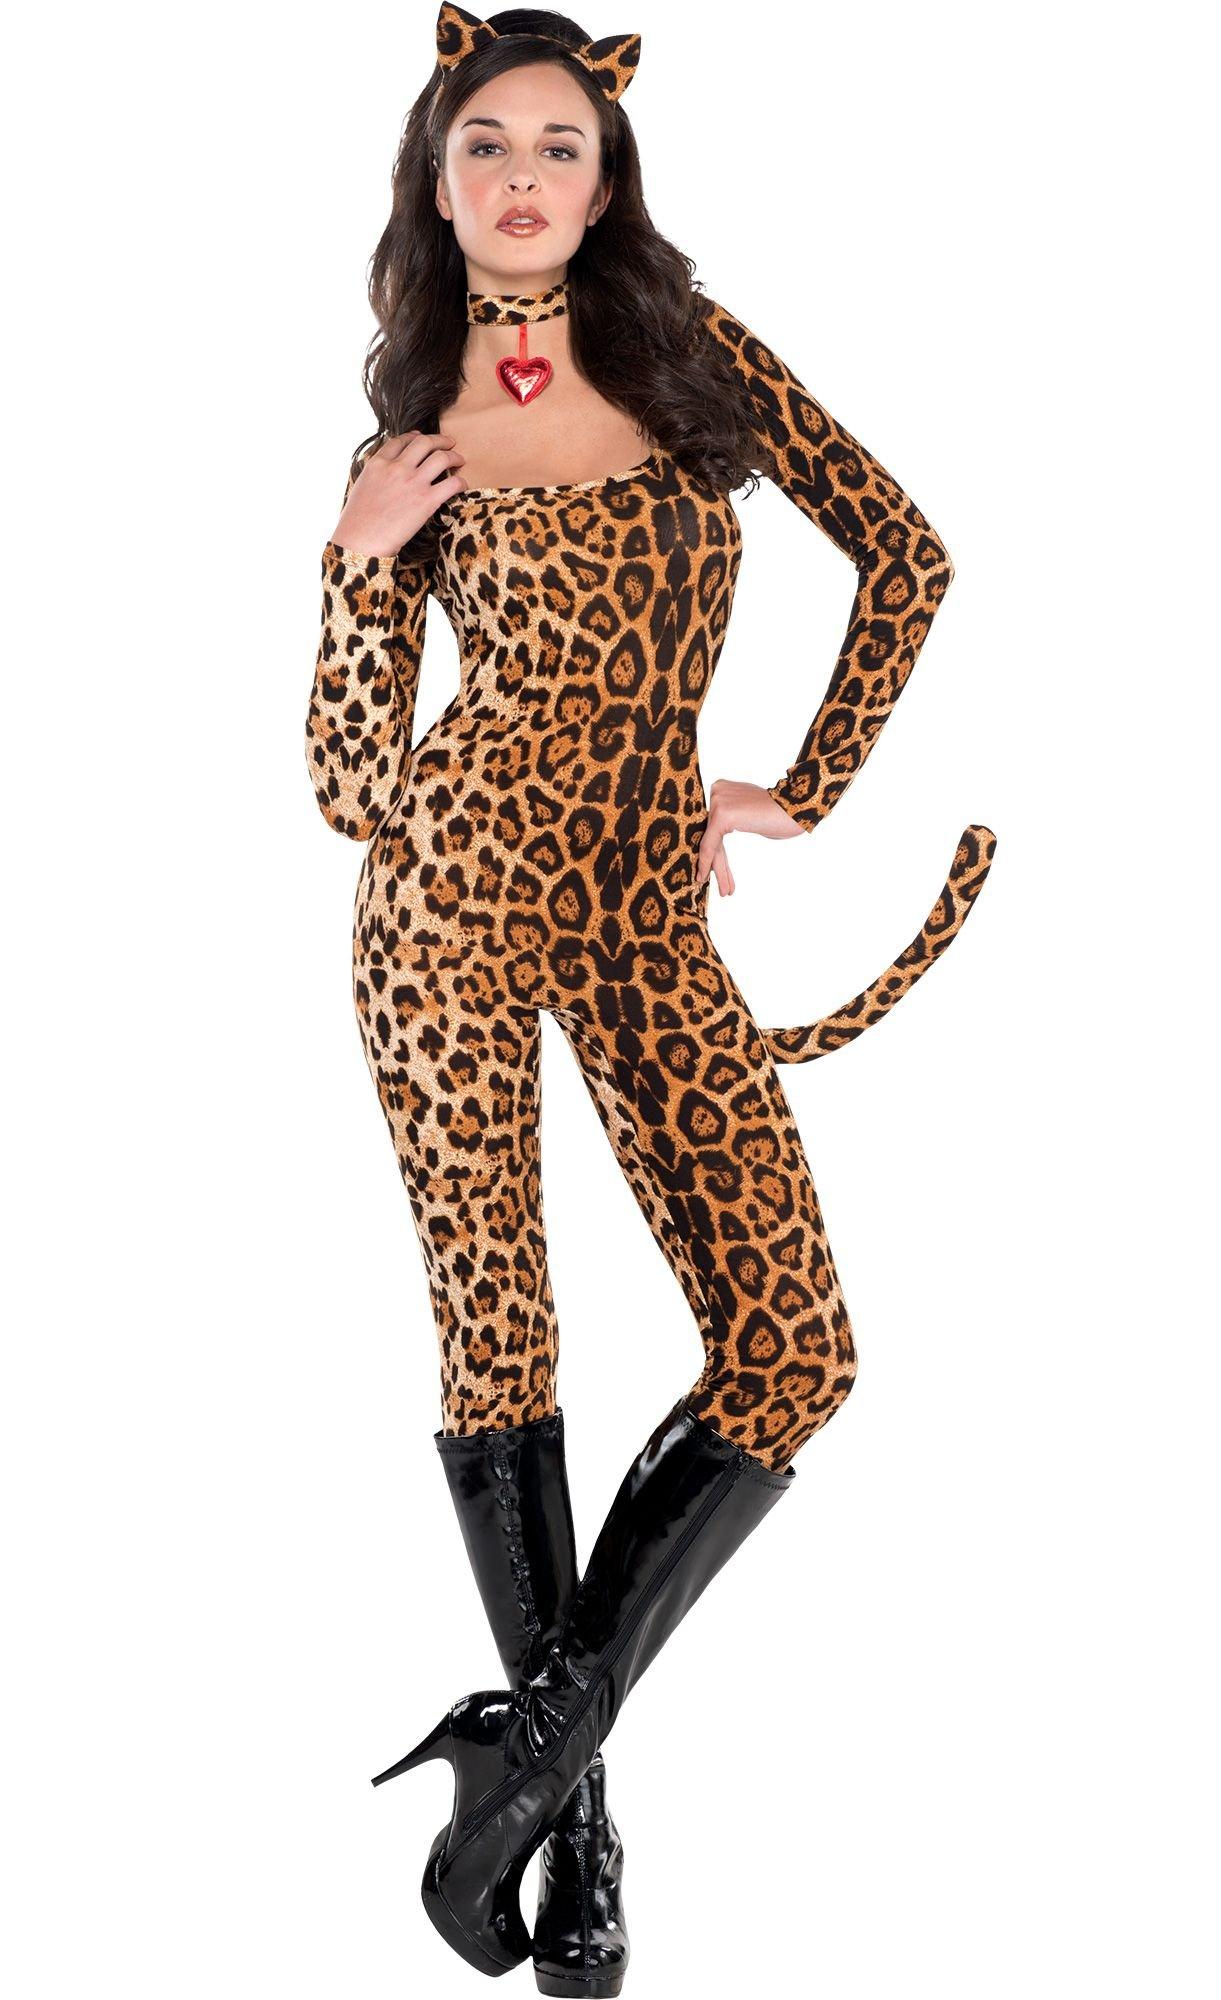 Leopard Catsuit Costume for Women | Party City